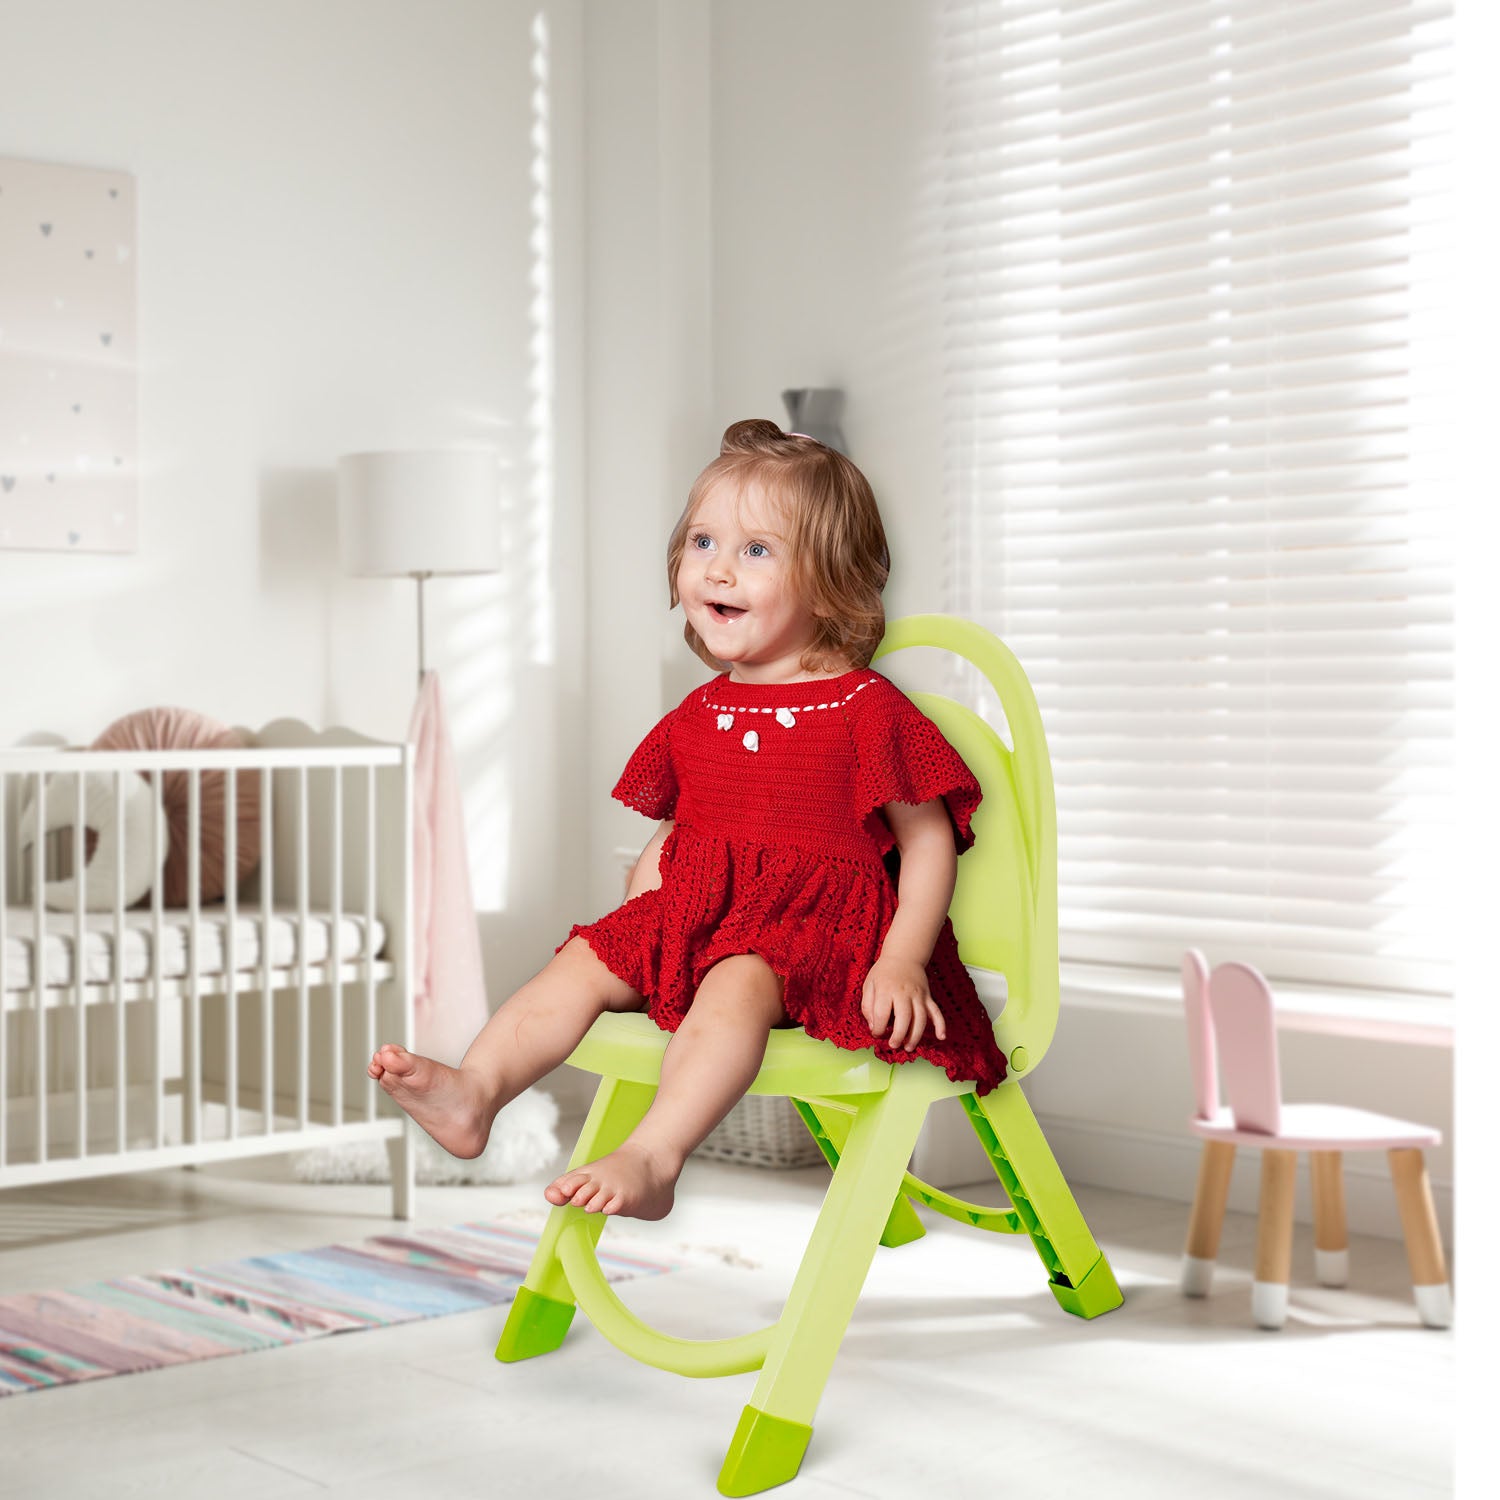 Foldable Multipurpose Green Chair - Baby Moo